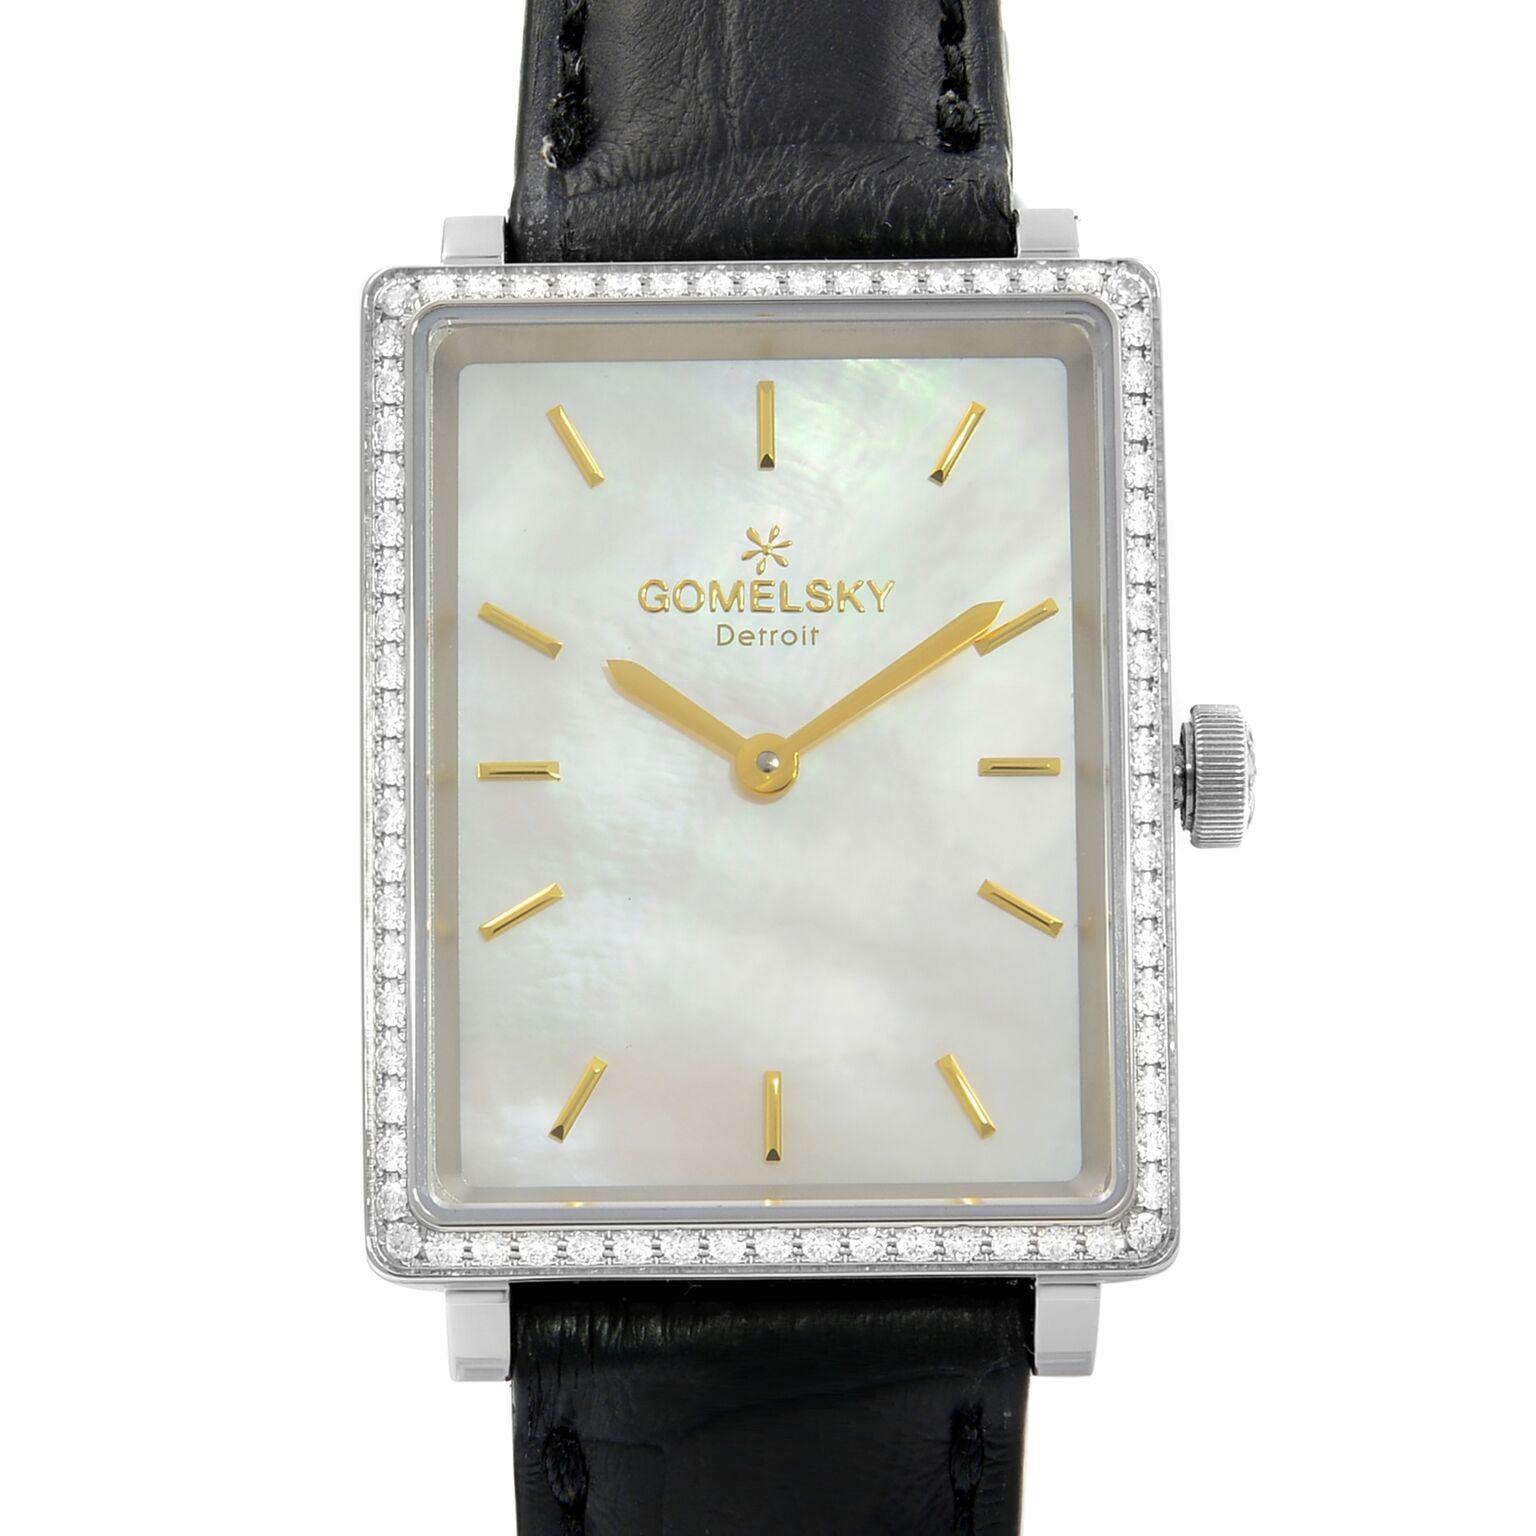 This brand new Gomelsky The Shirley G0120072639 is a beautiful Ladie's timepiece that is powered by quartz (battery) movement which is cased in a stainless steel case. It has a rectangle shape face, dial, and has hand sticks style markers. It is